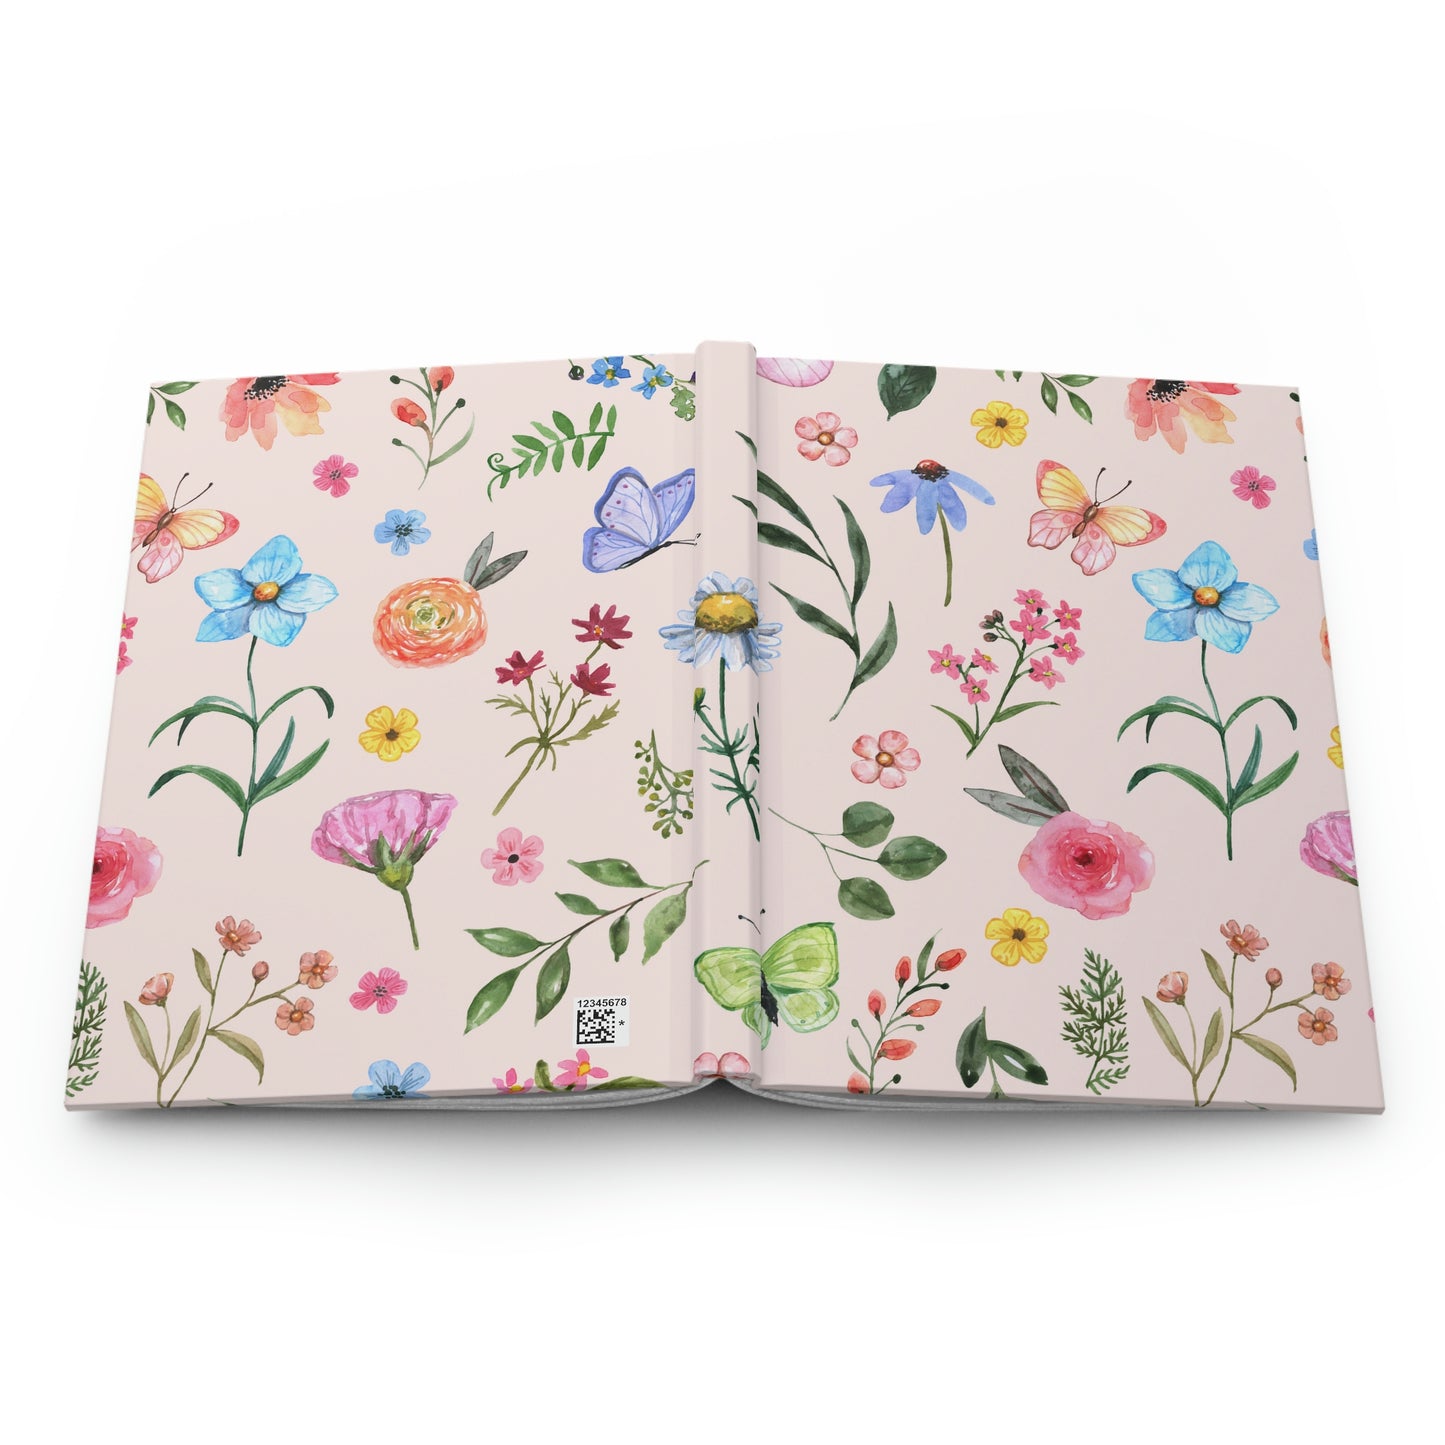 Spring Daisies and Butterflies Hardcover Journal Matte